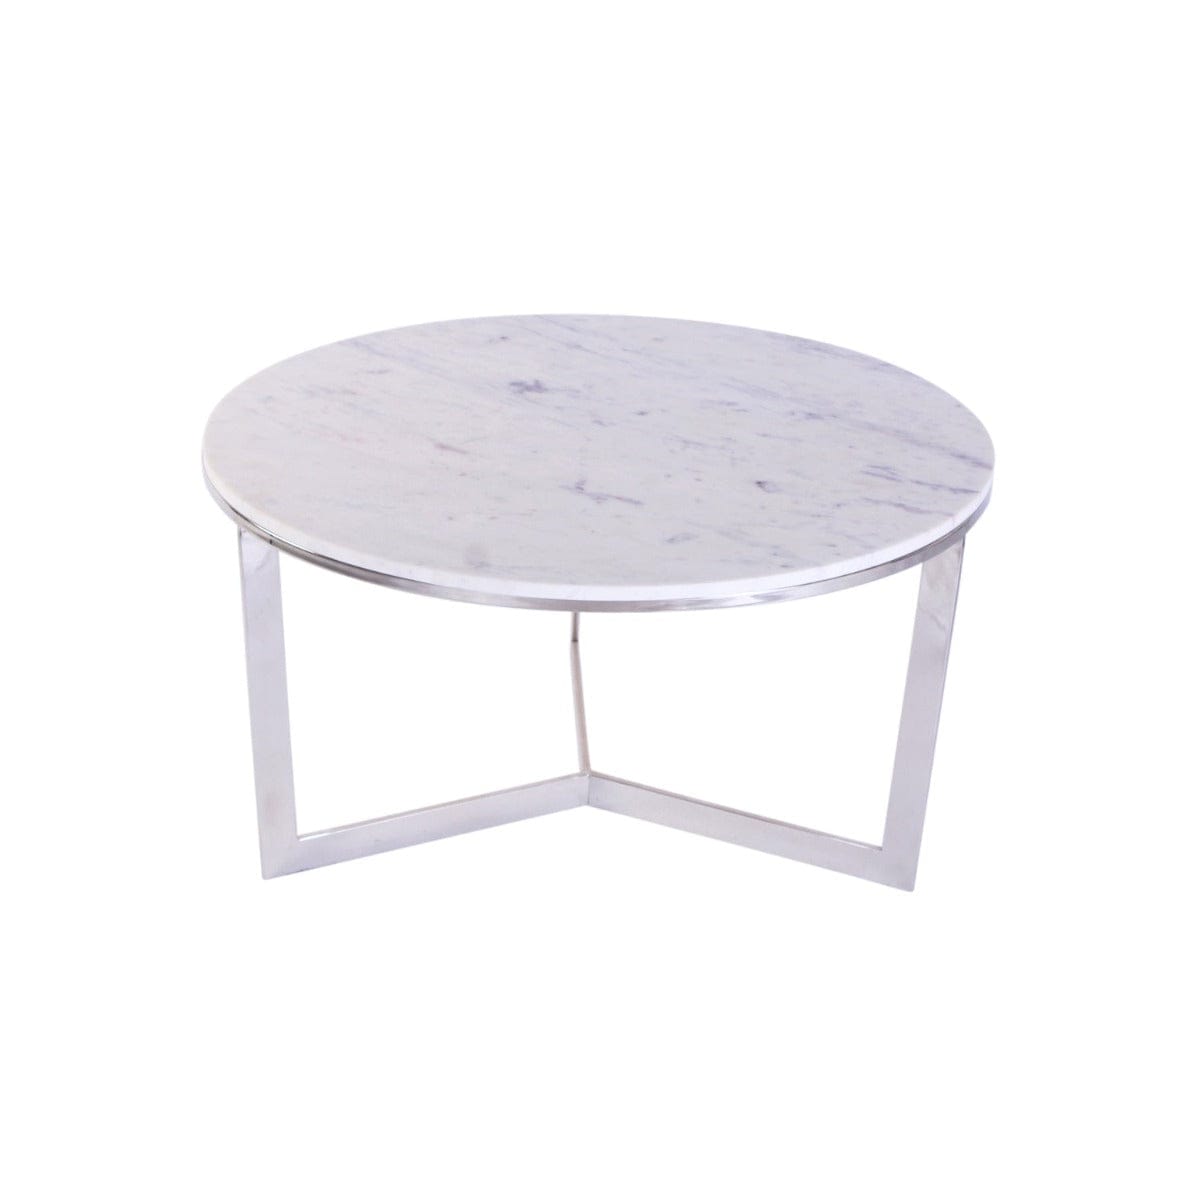 Mackey Marble Coffee Table In Chrome Finish